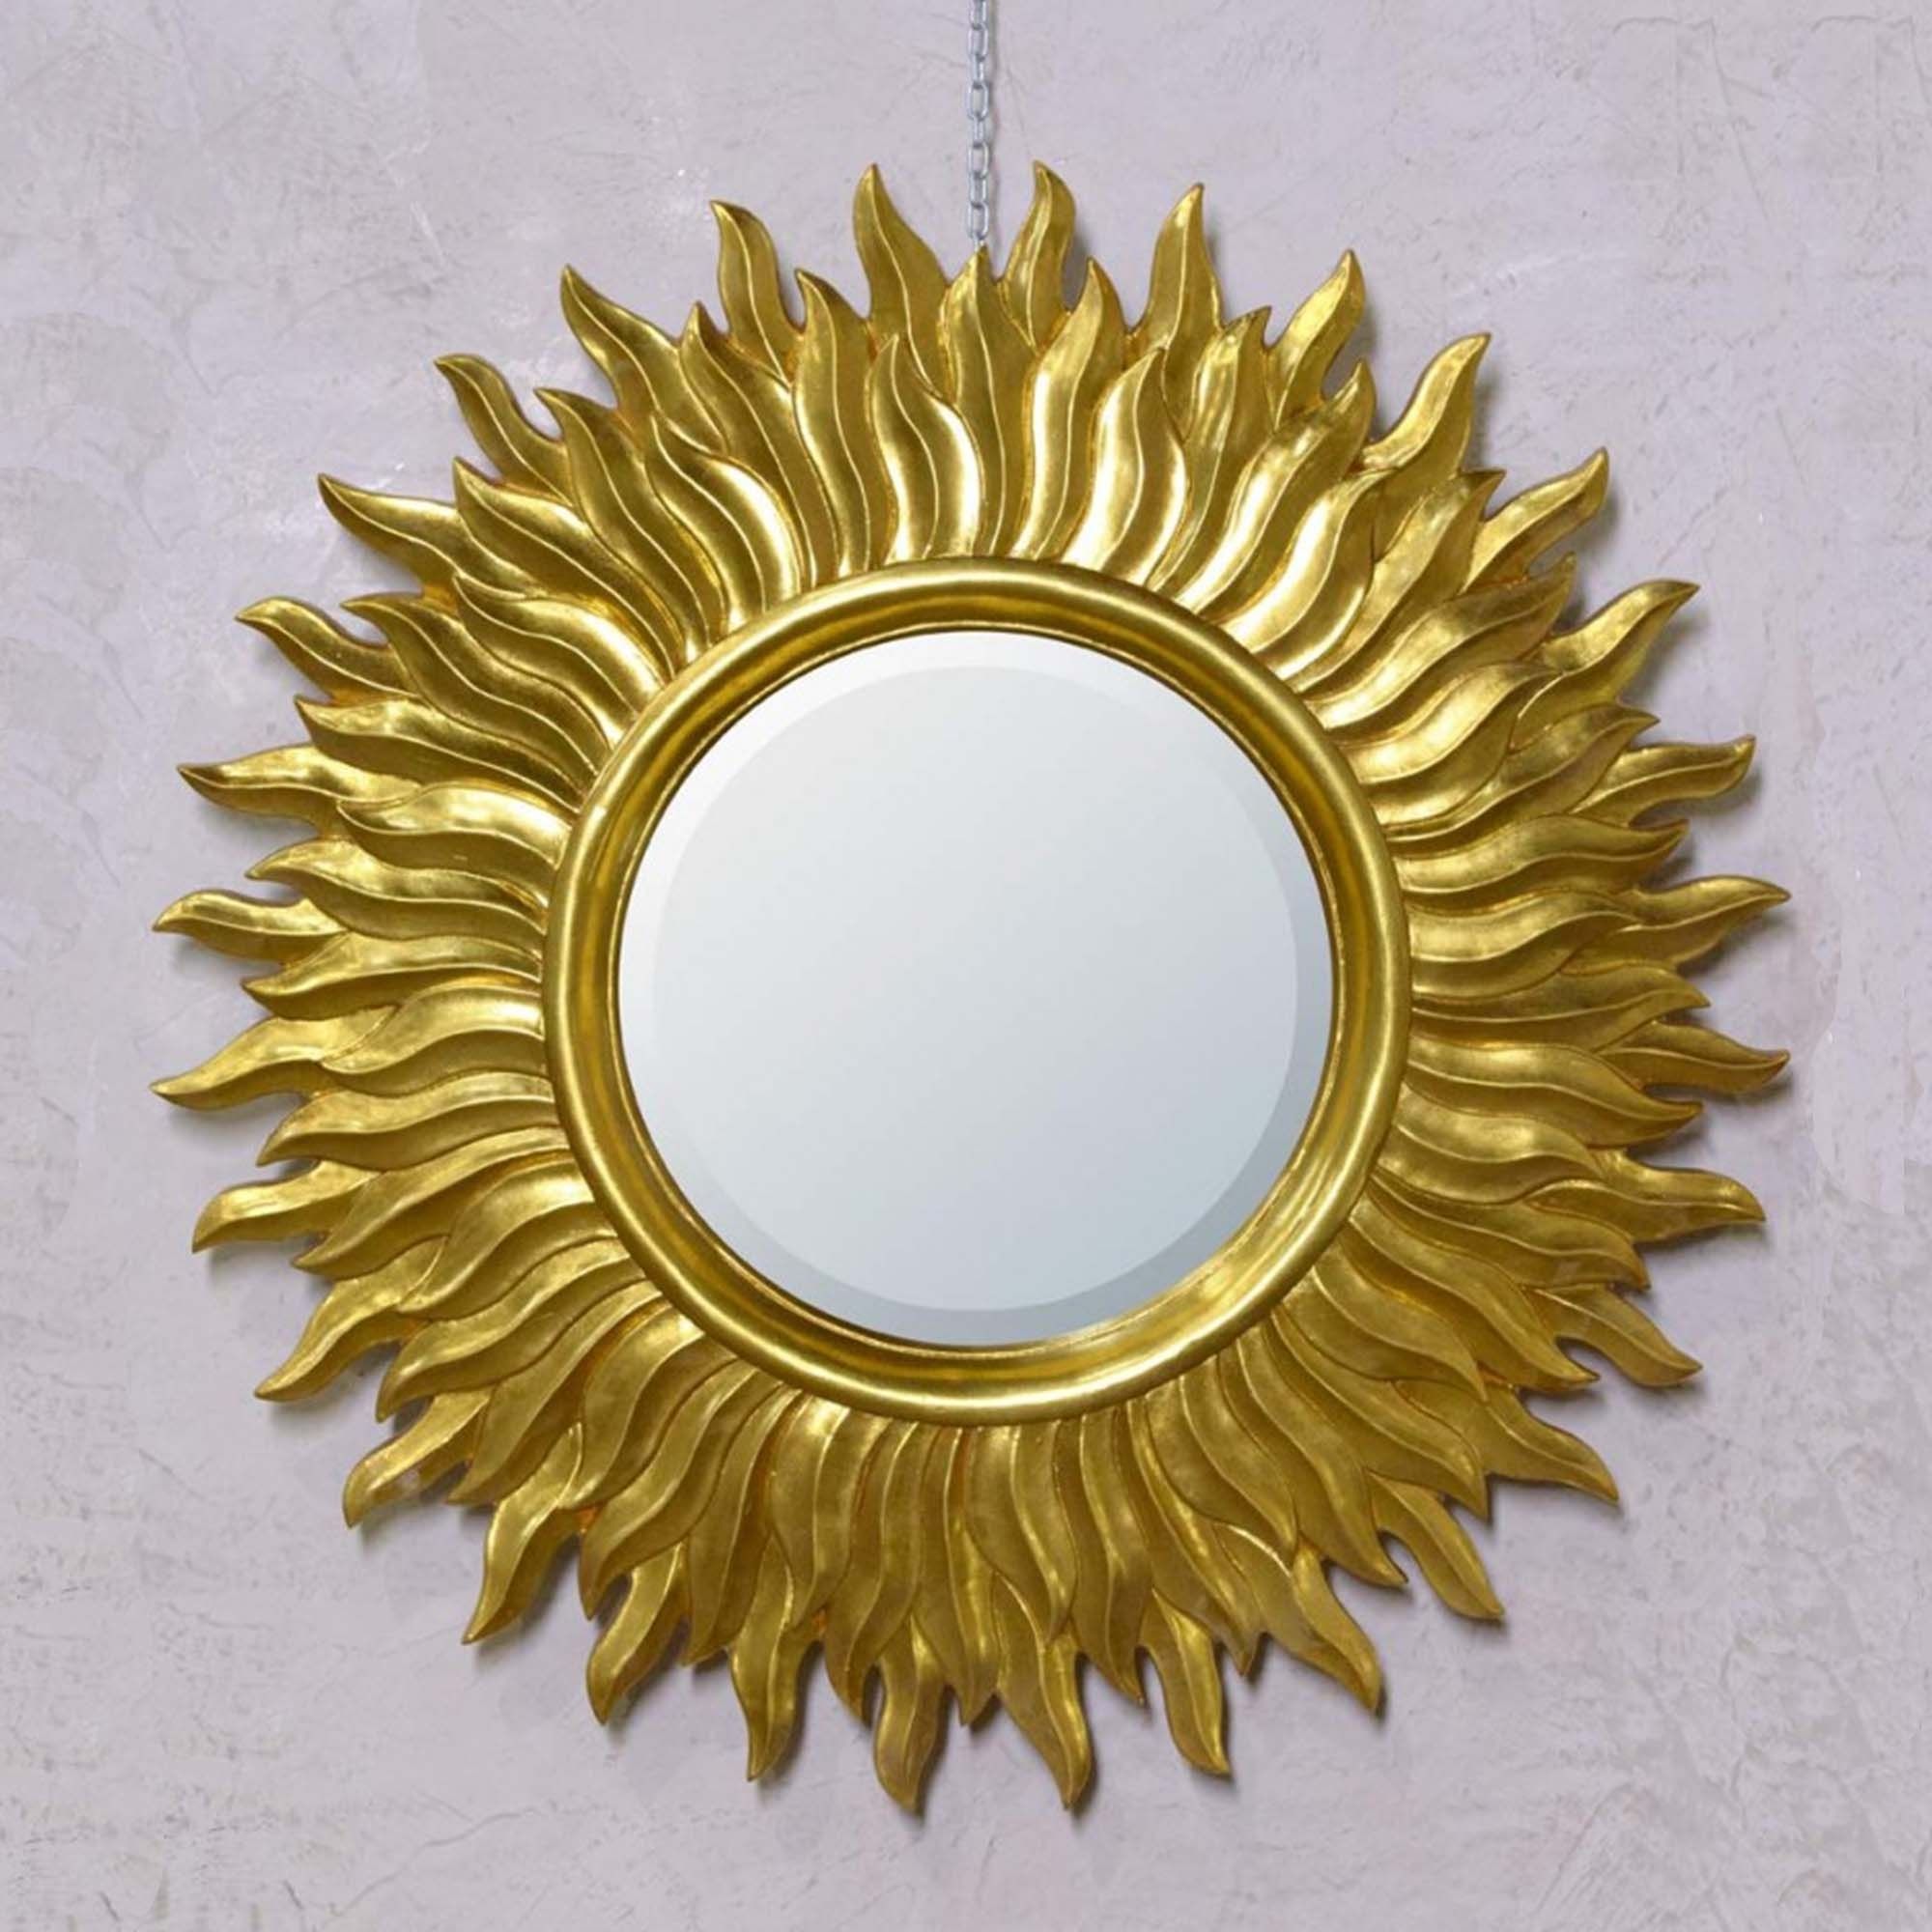 Gold Sunburst Decorative Wall Mirror | Mirror | Homesdirect365 Throughout Gold Metal Mirrored Wall Art (View 5 of 15)